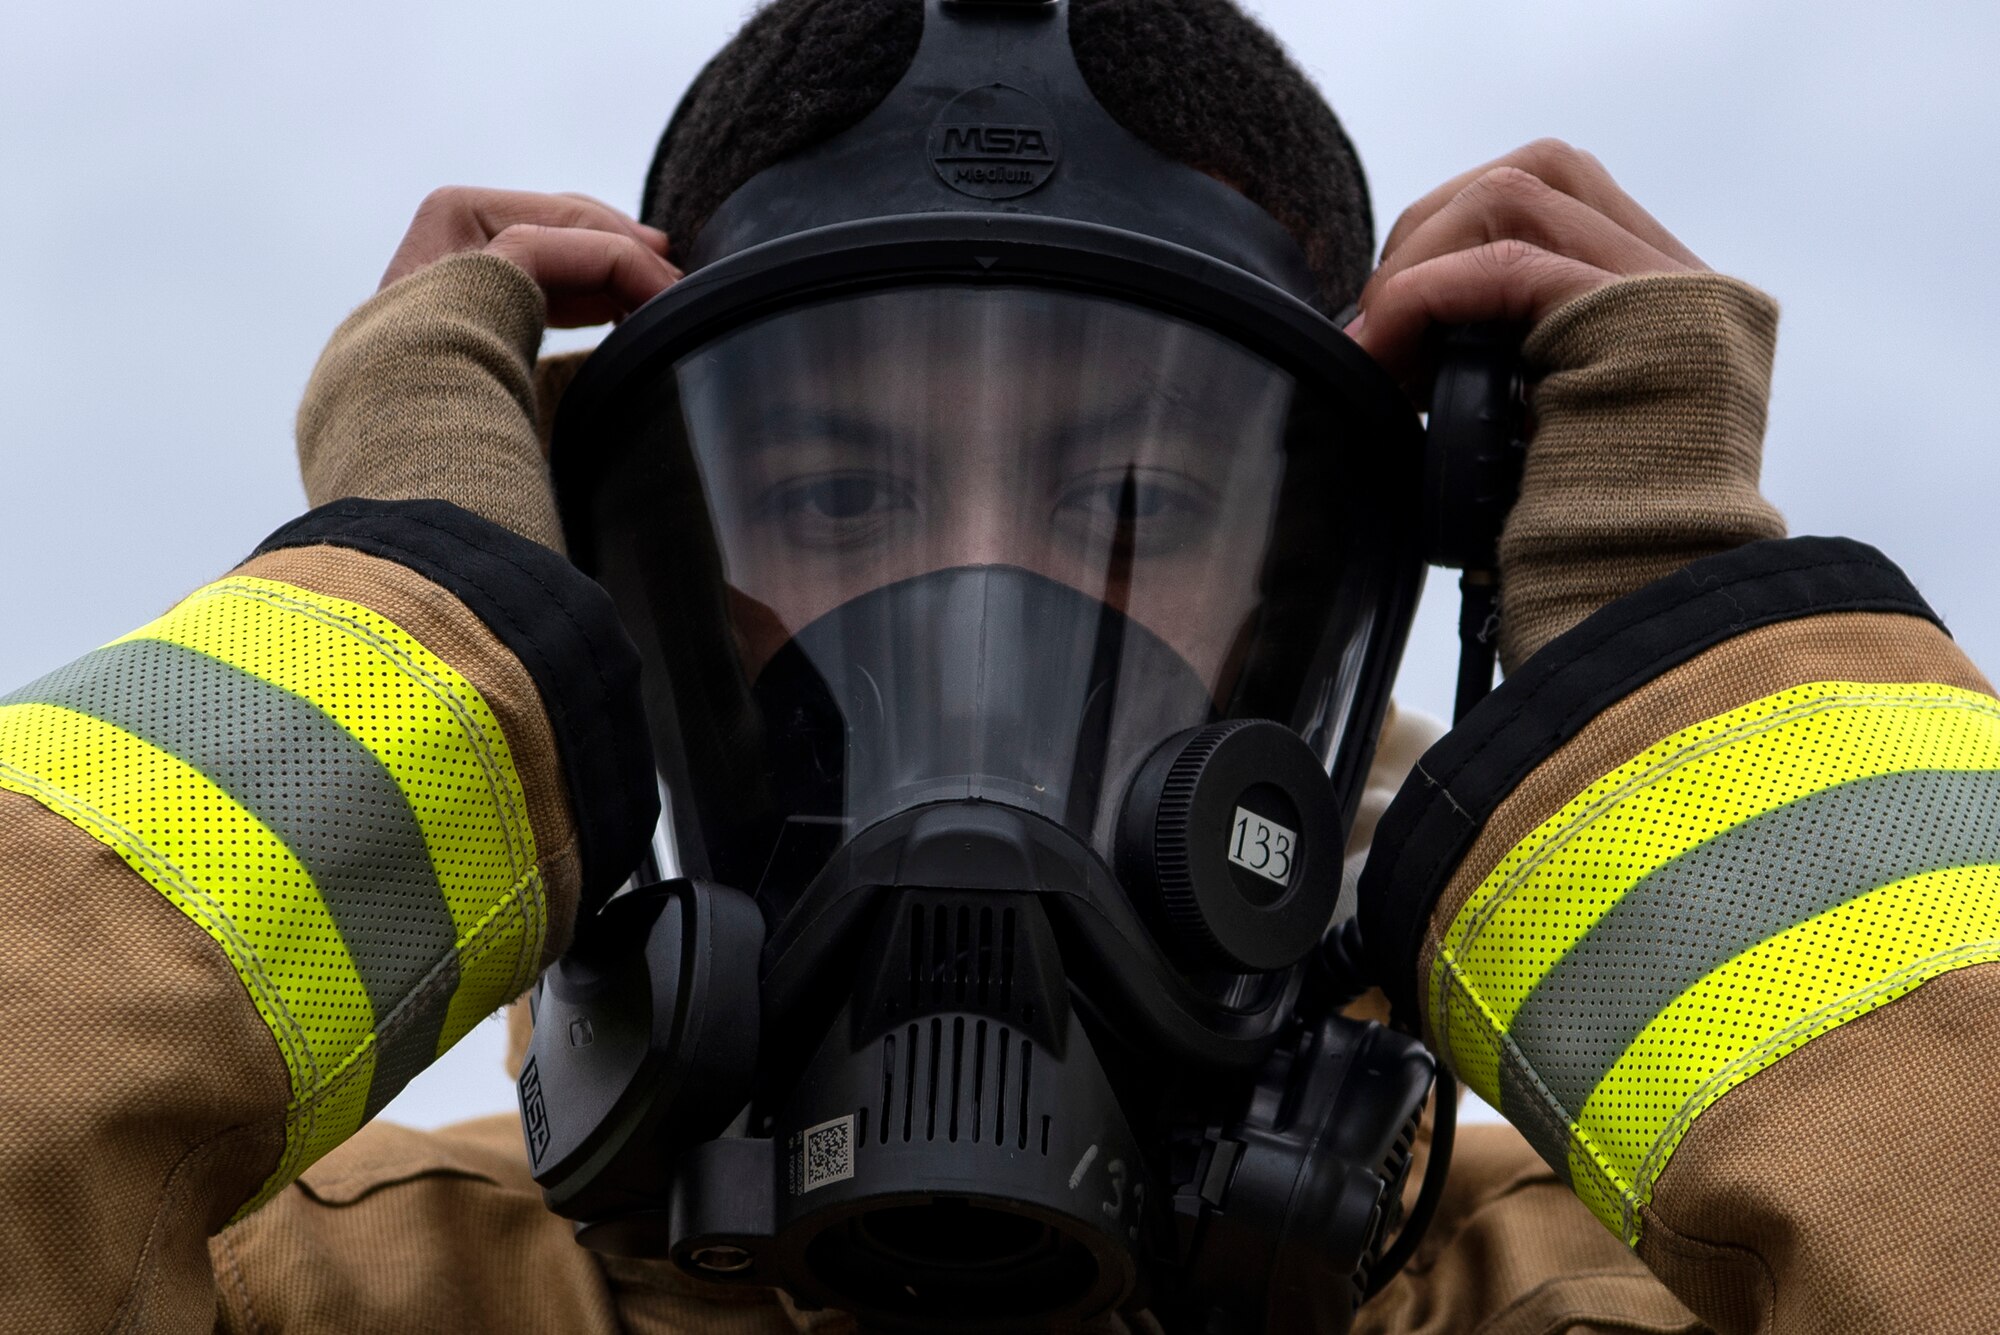 Omar Moylan, a senior at Spangdahlem High School, dons fire-protection gear at Spangdahlem Air Base, Germany, March 26, 2019. Moylan, who plans to enlist in the U.S. Air Force as a firefighter, participated in exercises with the 52nd Civil Engineer Squadron Fire Department as part of the school's Career Practicum program. (U.S. Air Force photo by Airman 1st Class Valerie Seelye)